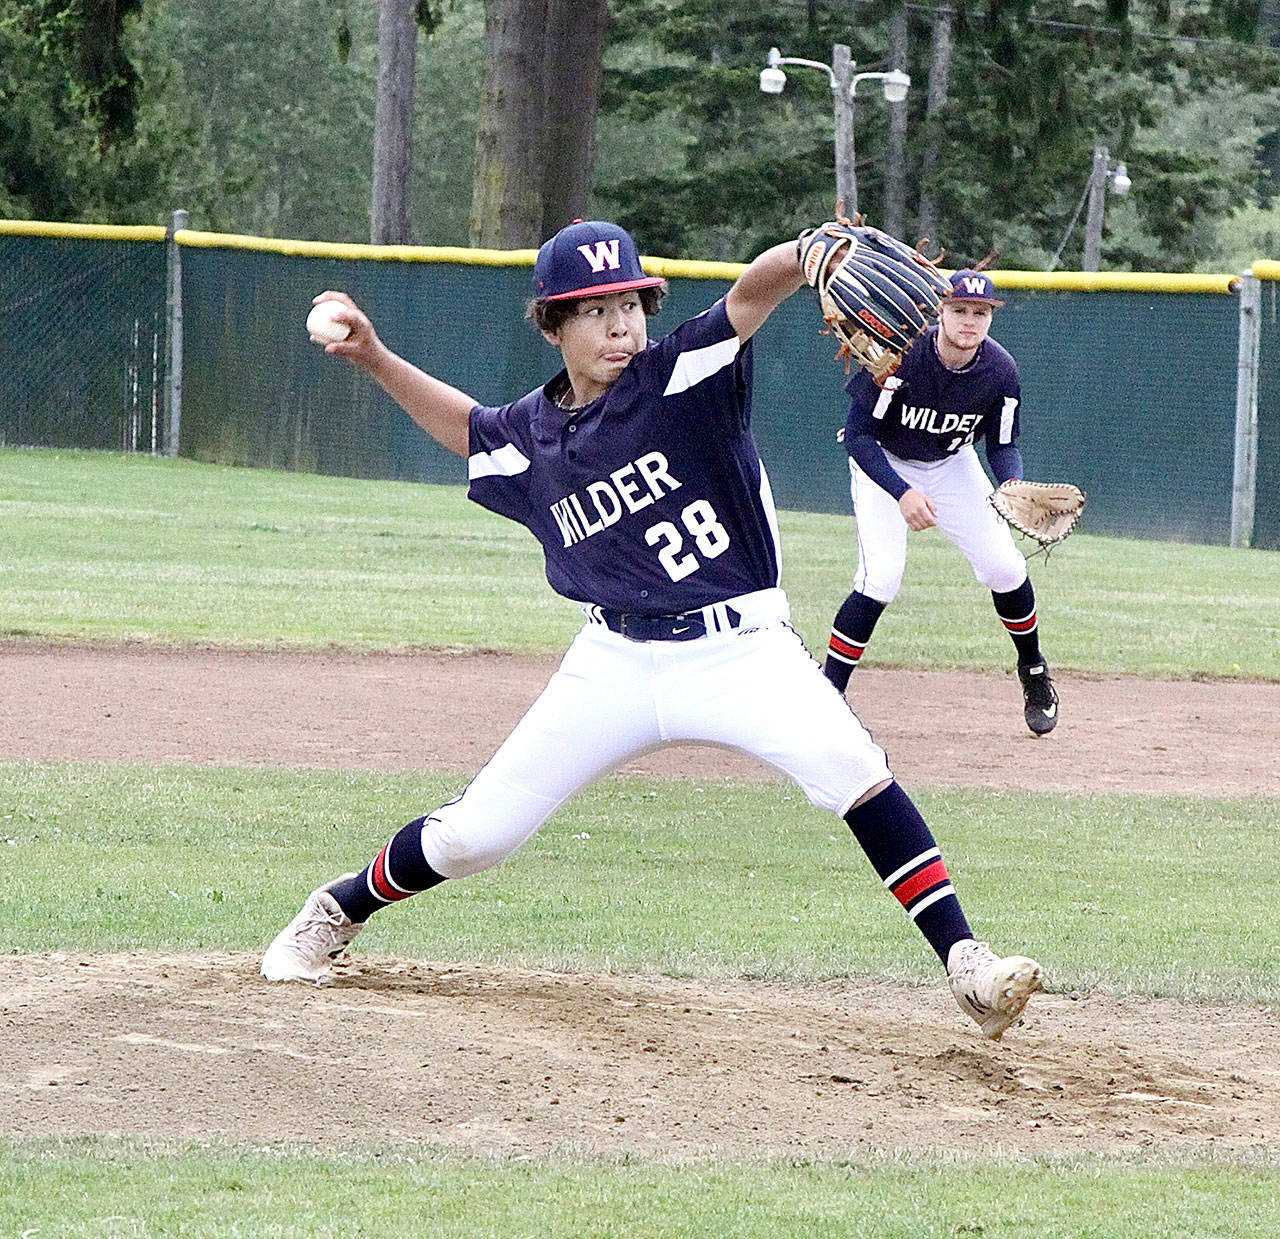 Payton Cagey pitches for Wilder Junior against Rock Creek on Sunday at Volunteer Field in Port Angeles. (Dave Logan/for Peninsula Daily News)